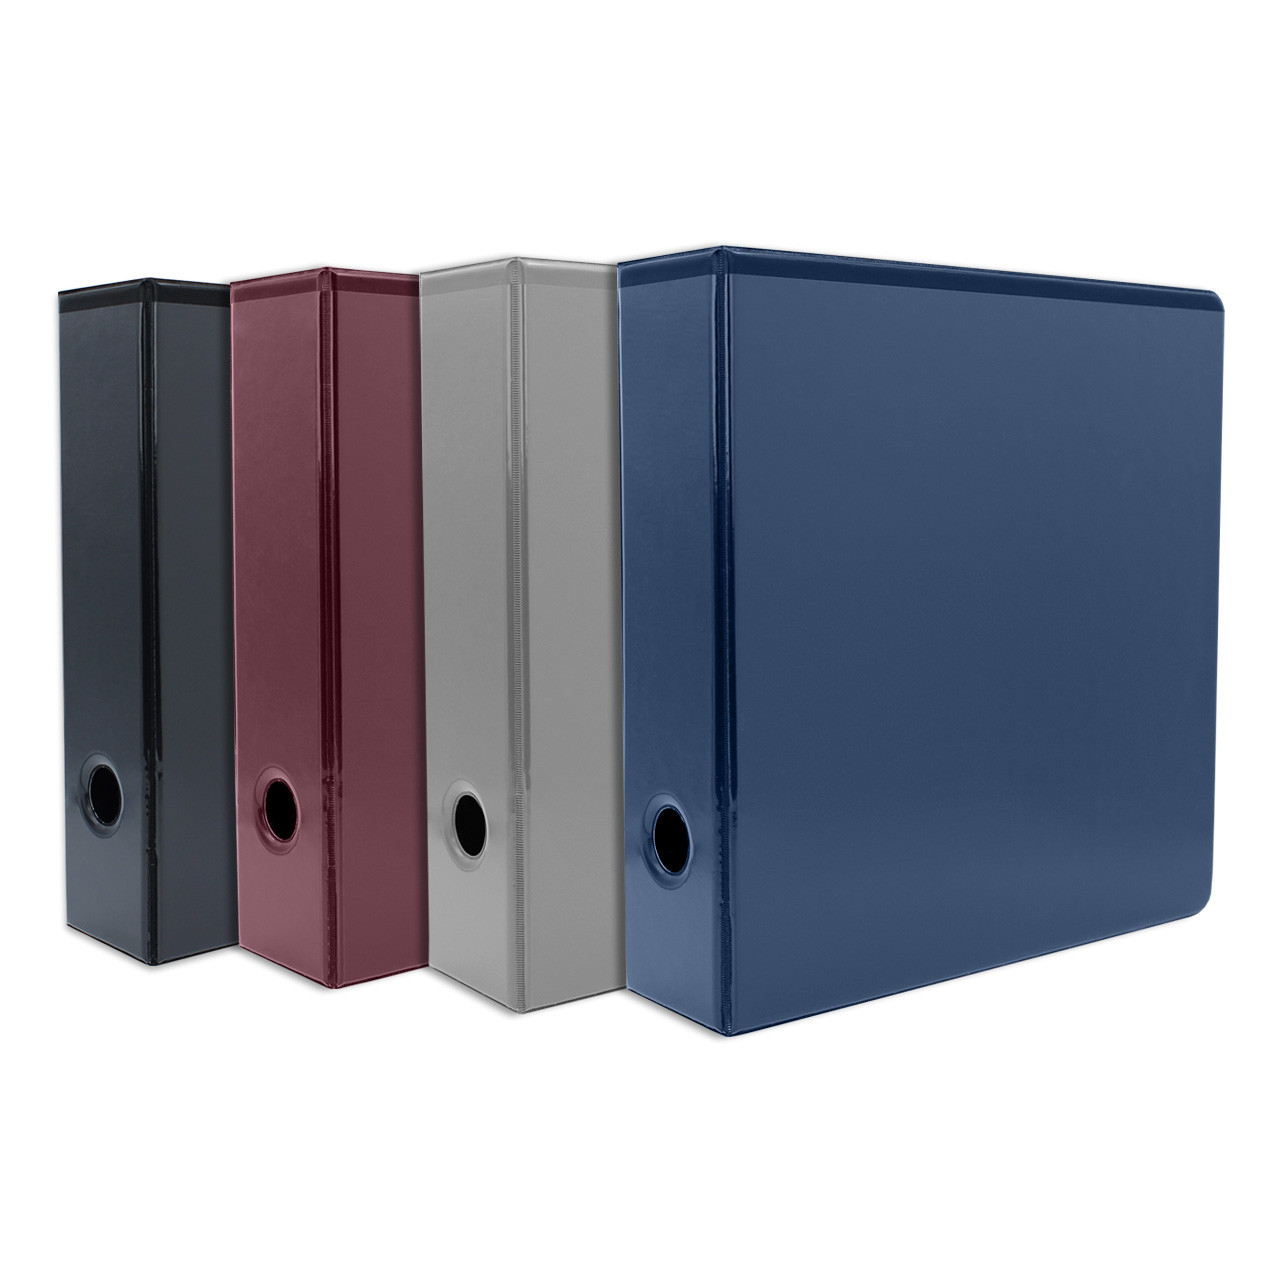 External 3-Ring Binder Storage with Open Top - Troy Products